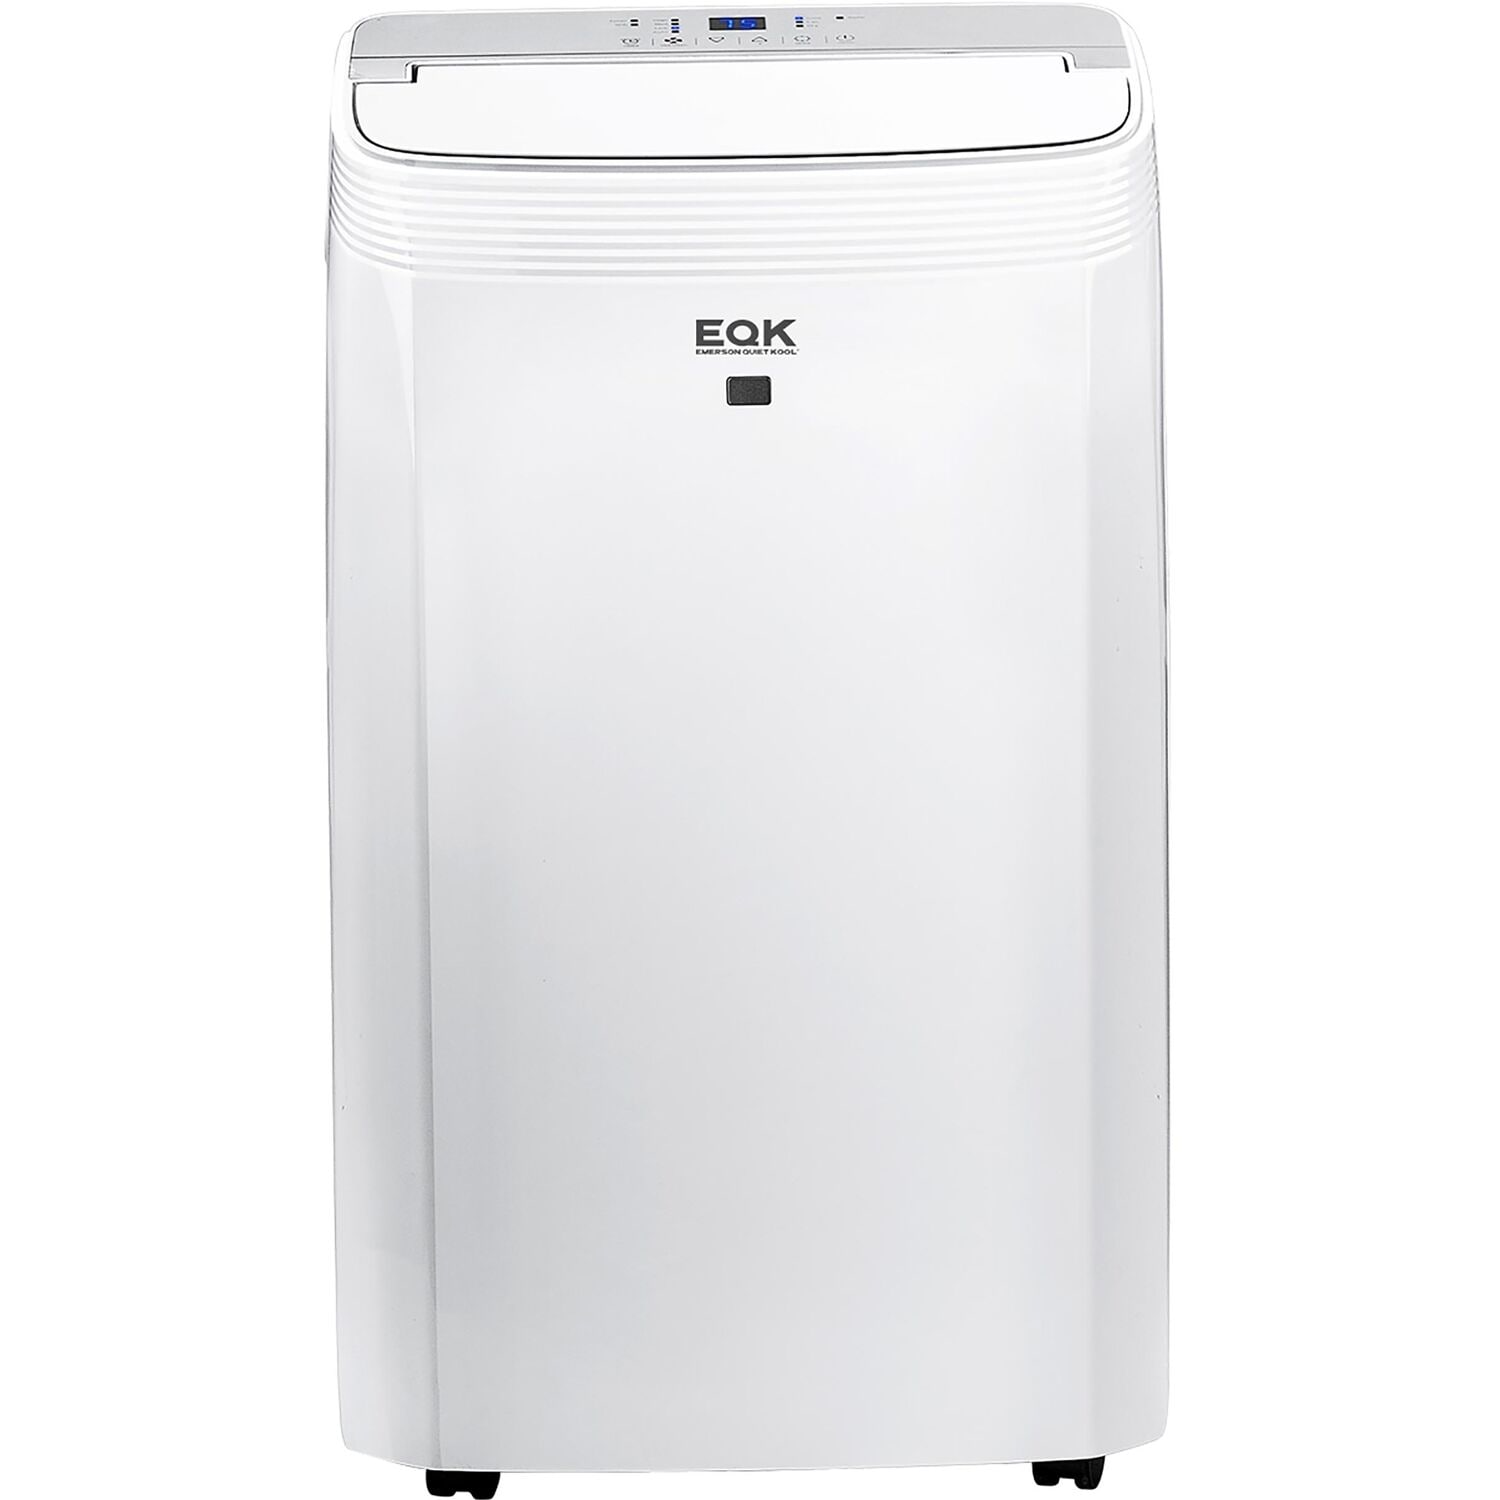 emerson-quiet-kool-portable-air-conditioners-at-lowes